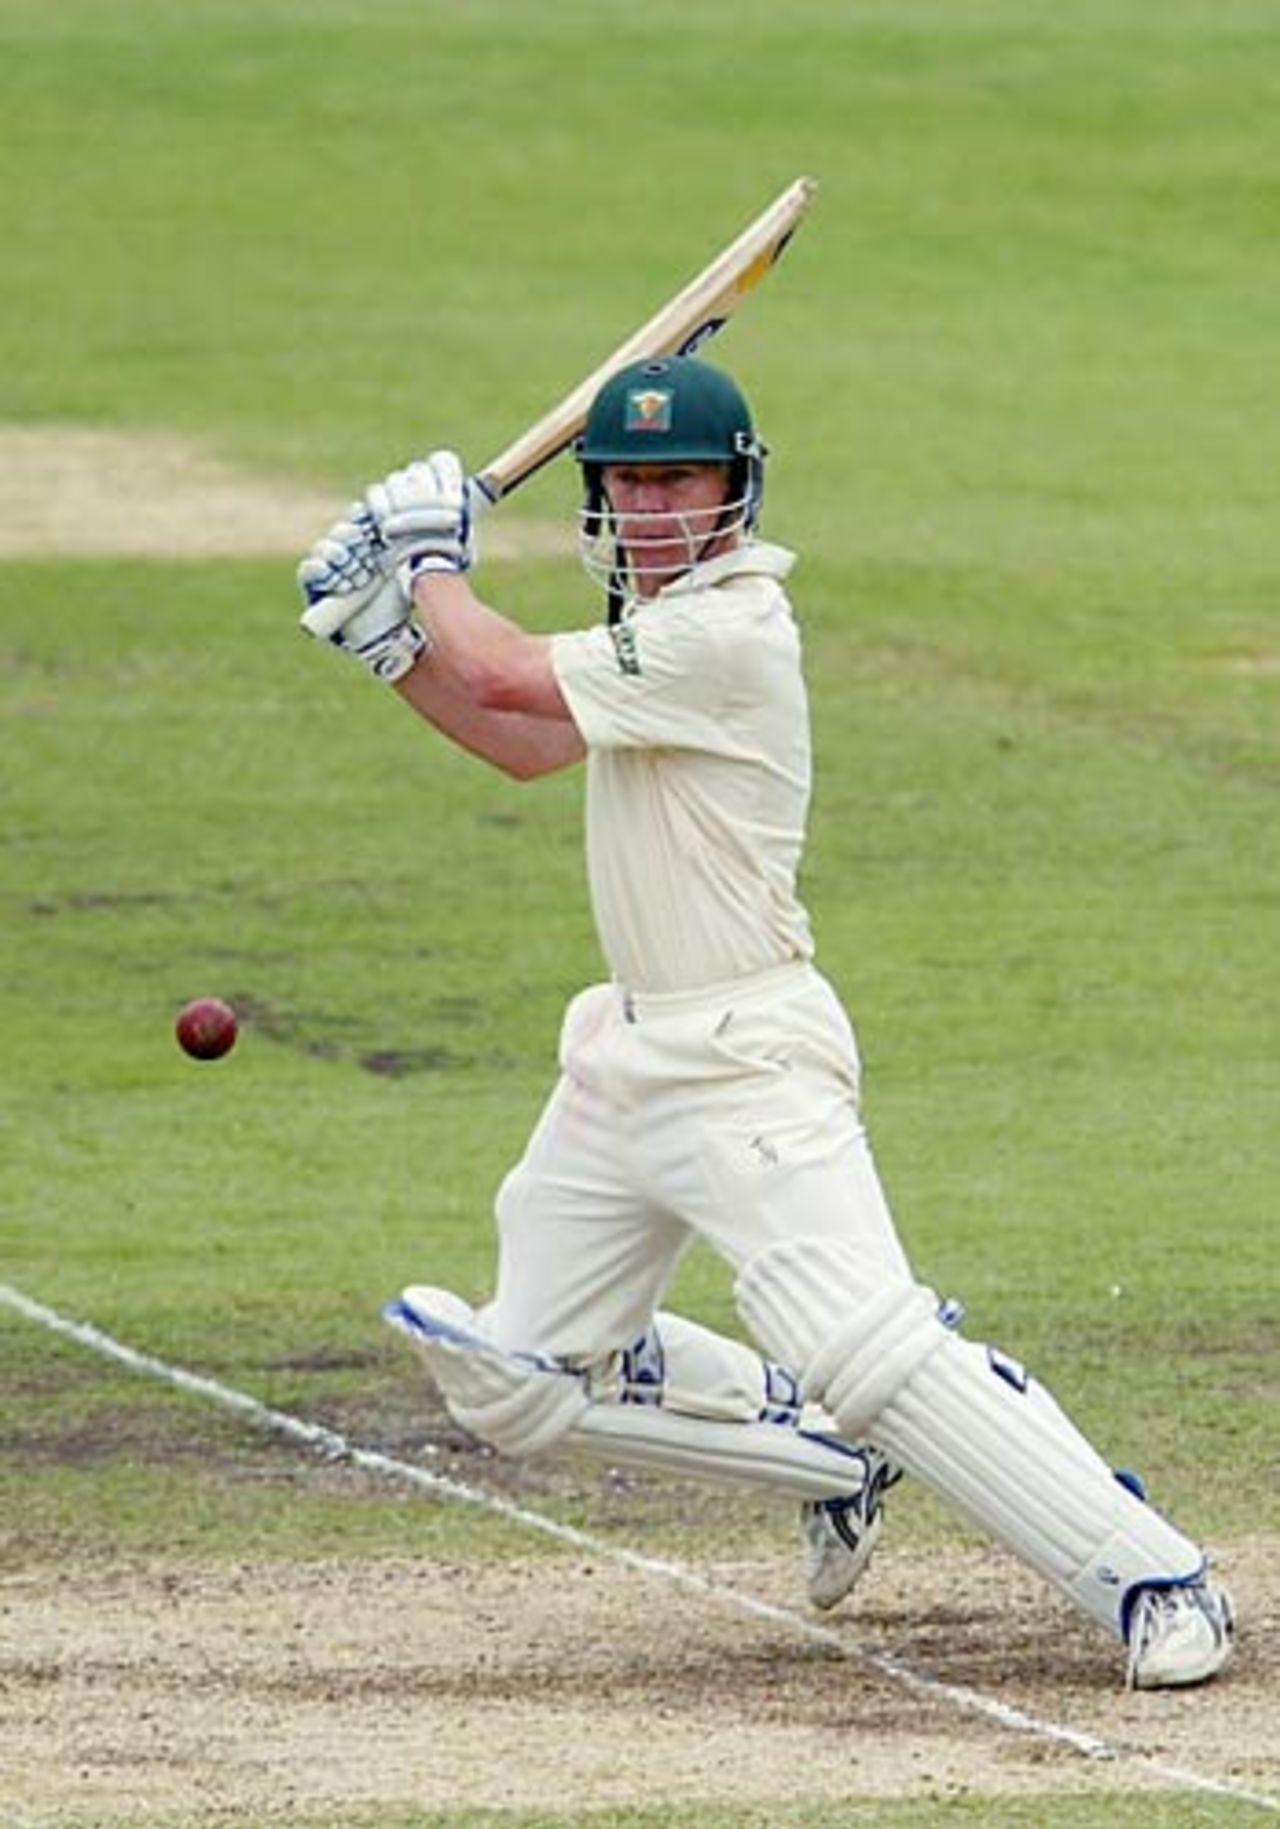 Xavier Doherty of Tasmania cuts on his way to 49 in the first innings, New South Wales v Tasmania, Pura Cup, Sydney, November 20